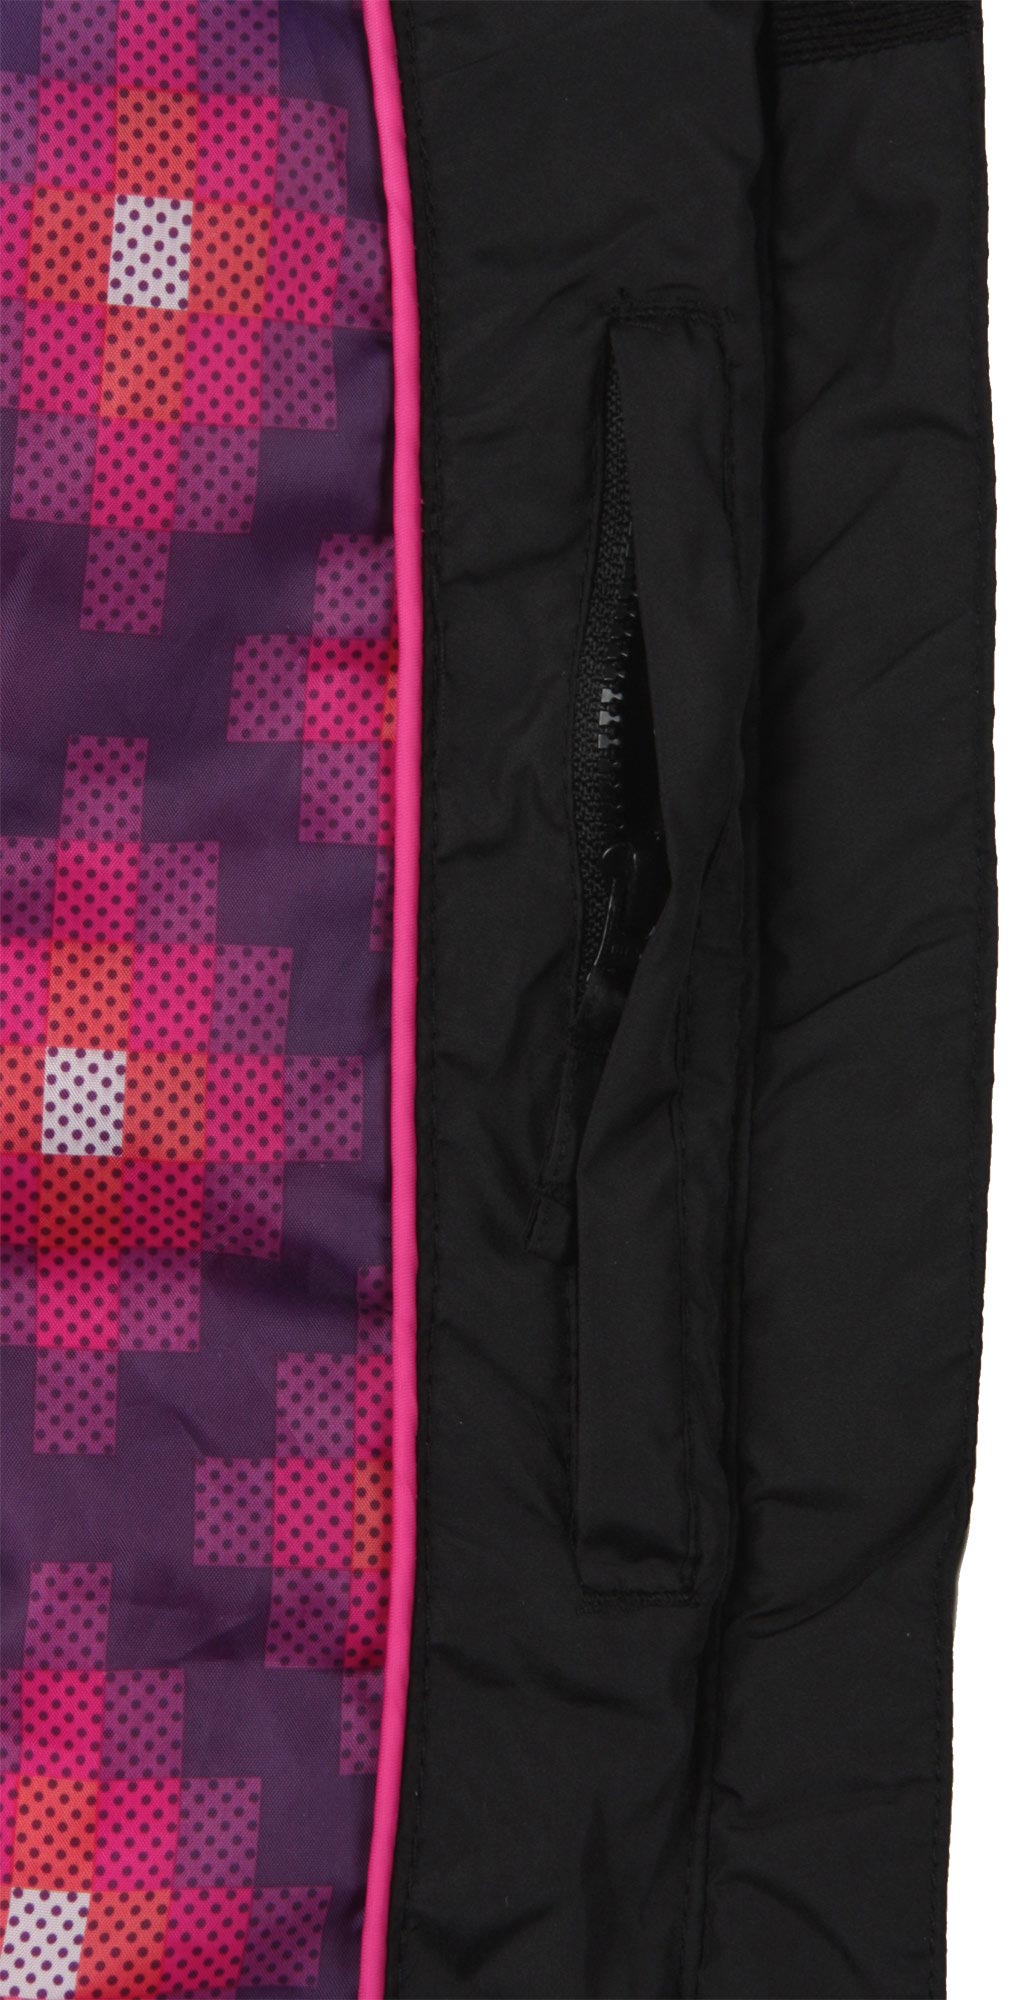 Kids’ quilted coat